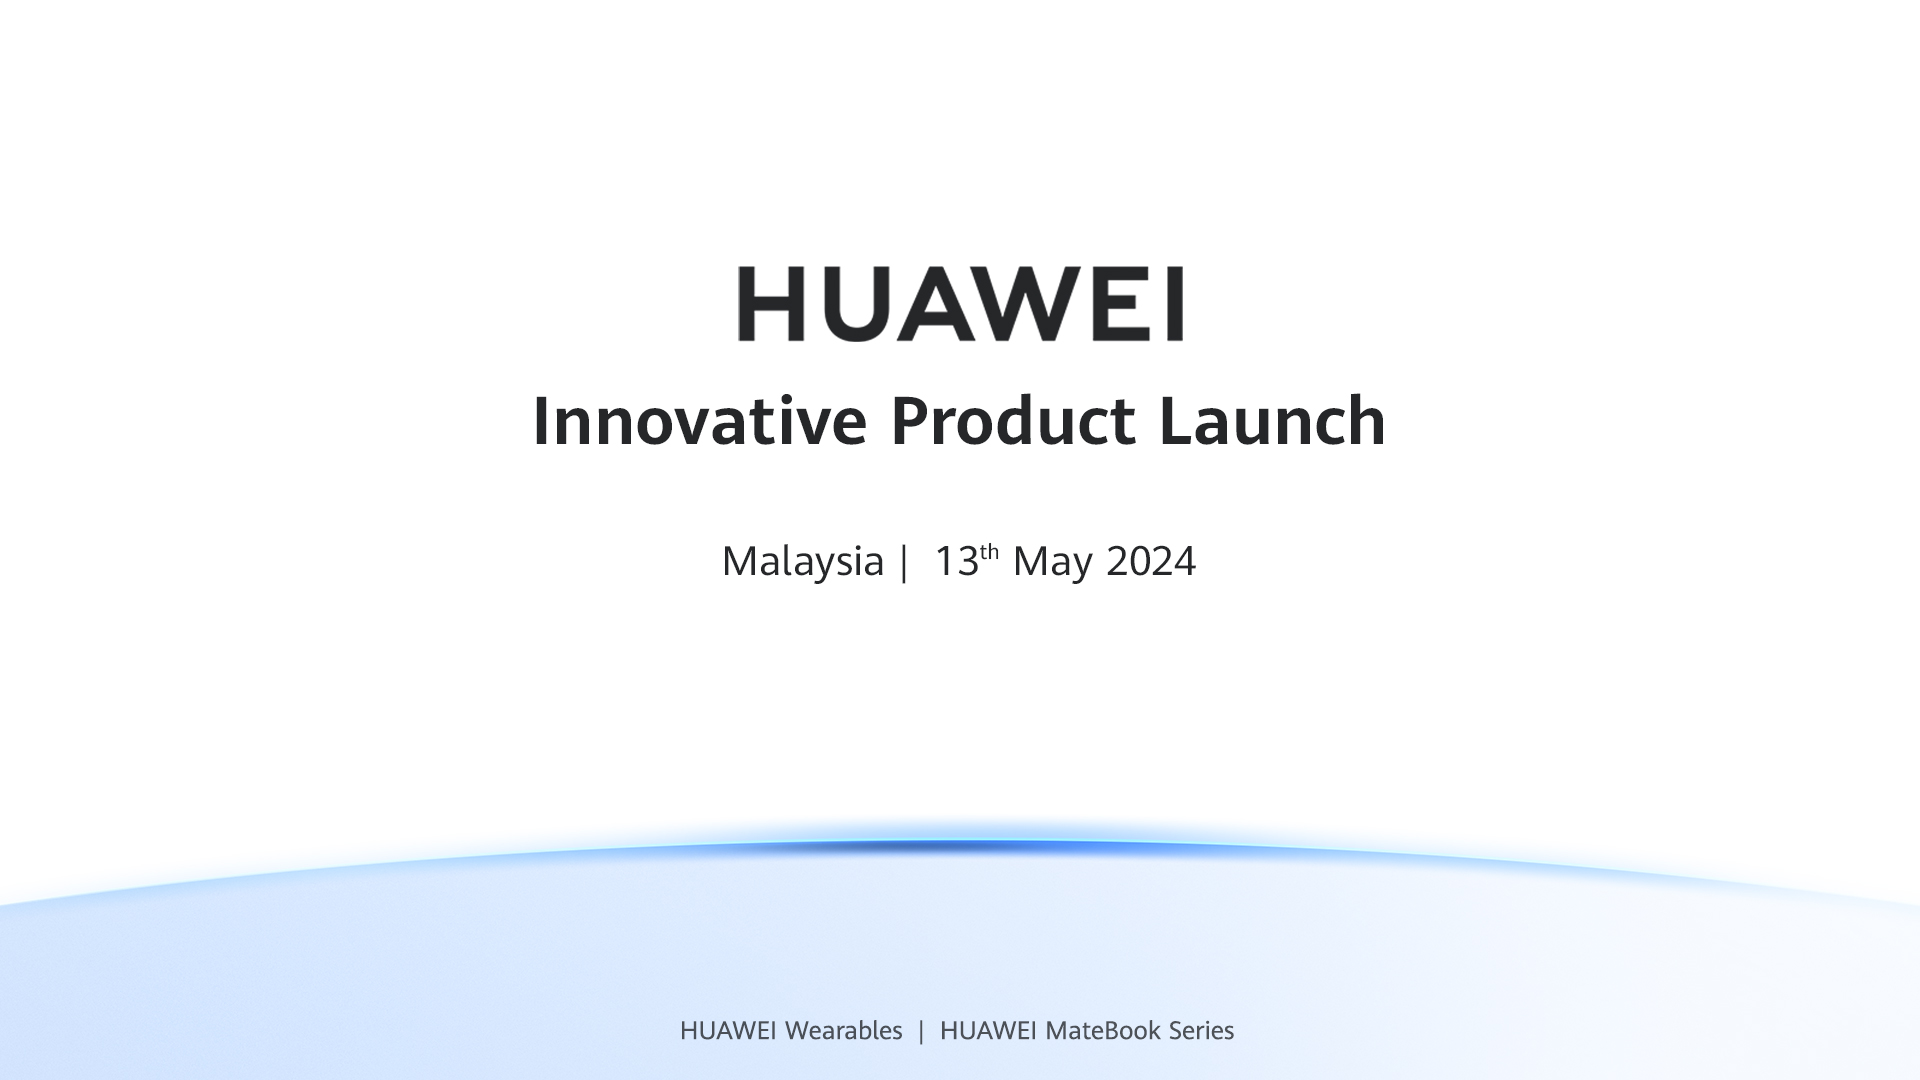 IMAGE 1 Upcoming Huawei innovative Product Launch in Malaysia 1